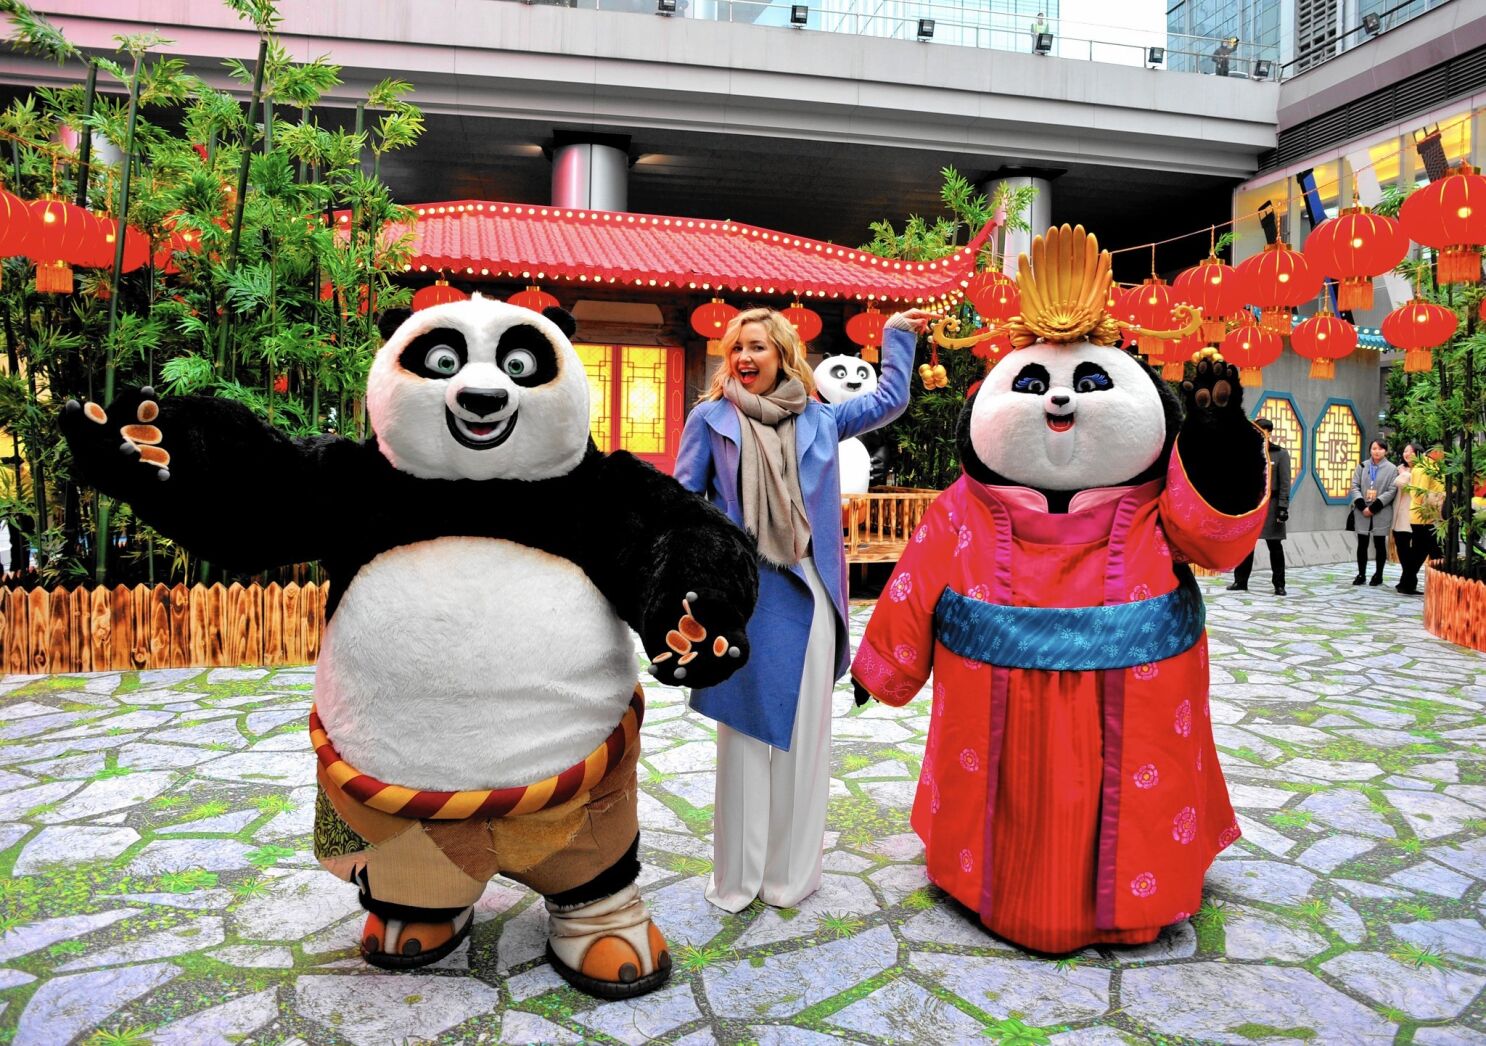 Kung Fu Panda 3' is expected to fortify DreamWorks Animation's ties to China  - Los Angeles Times